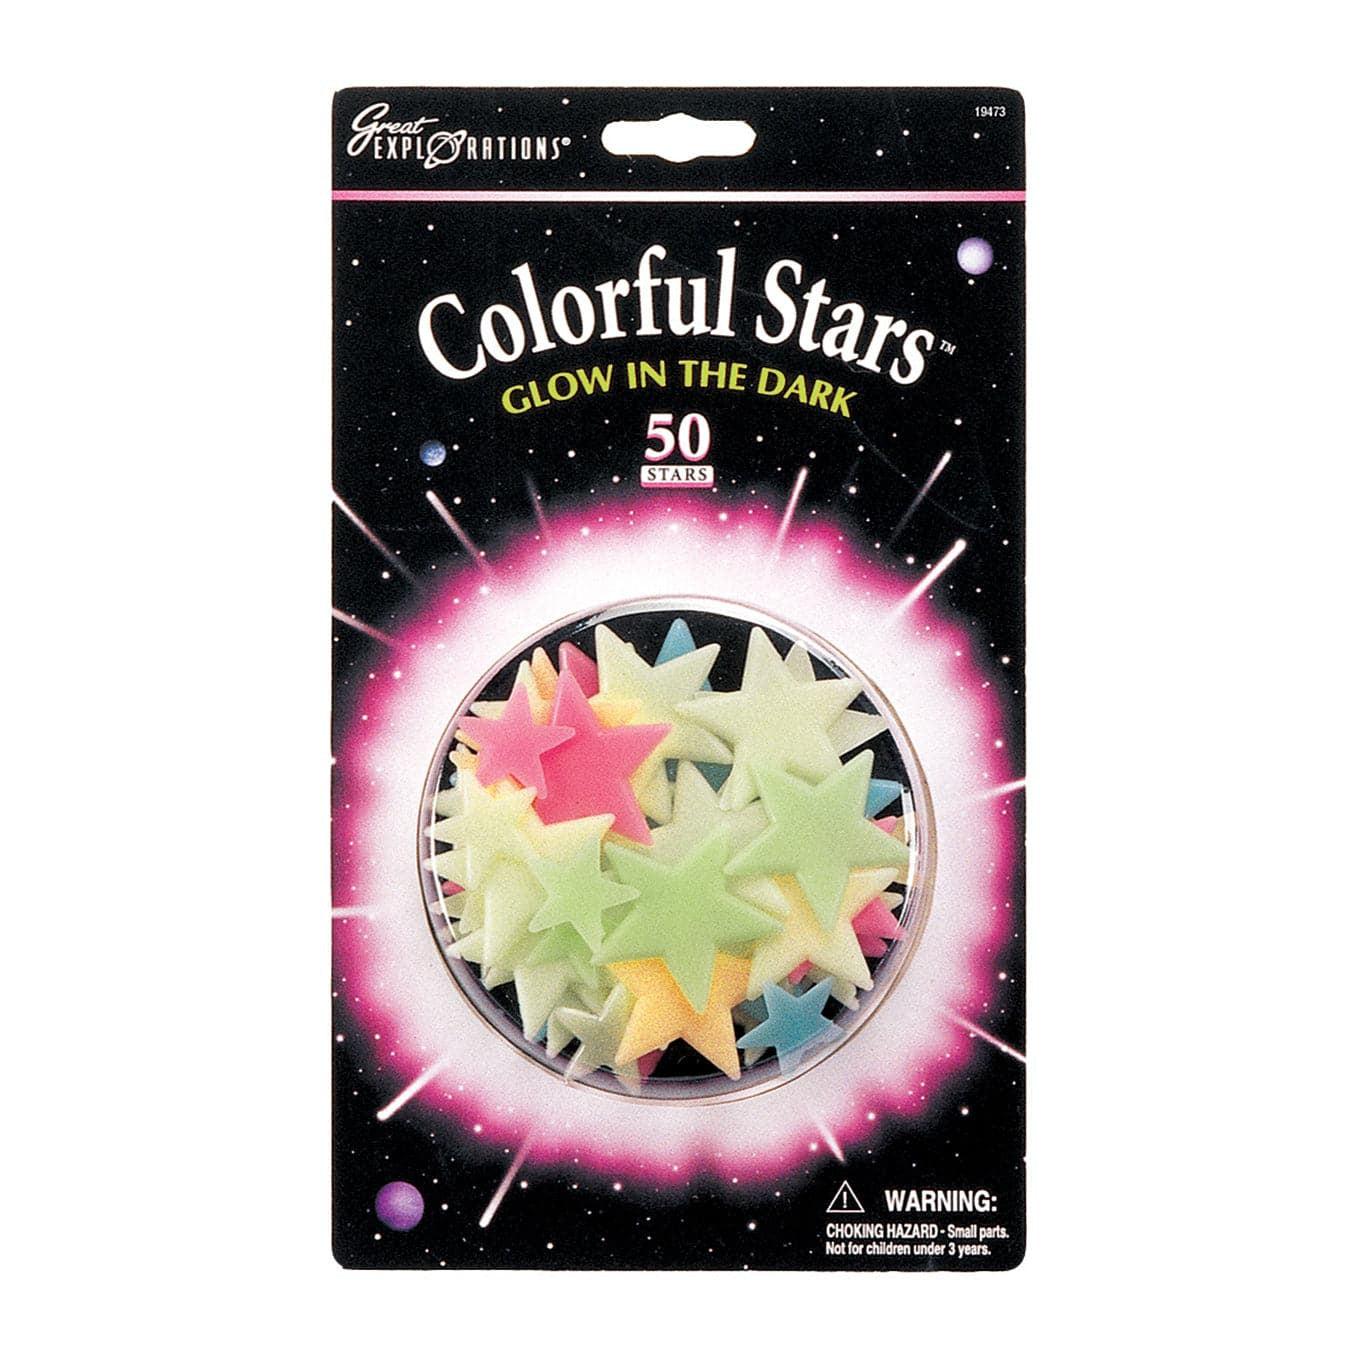 University Games-Glow in the Dark Colorful Stars-19473-Legacy Toys